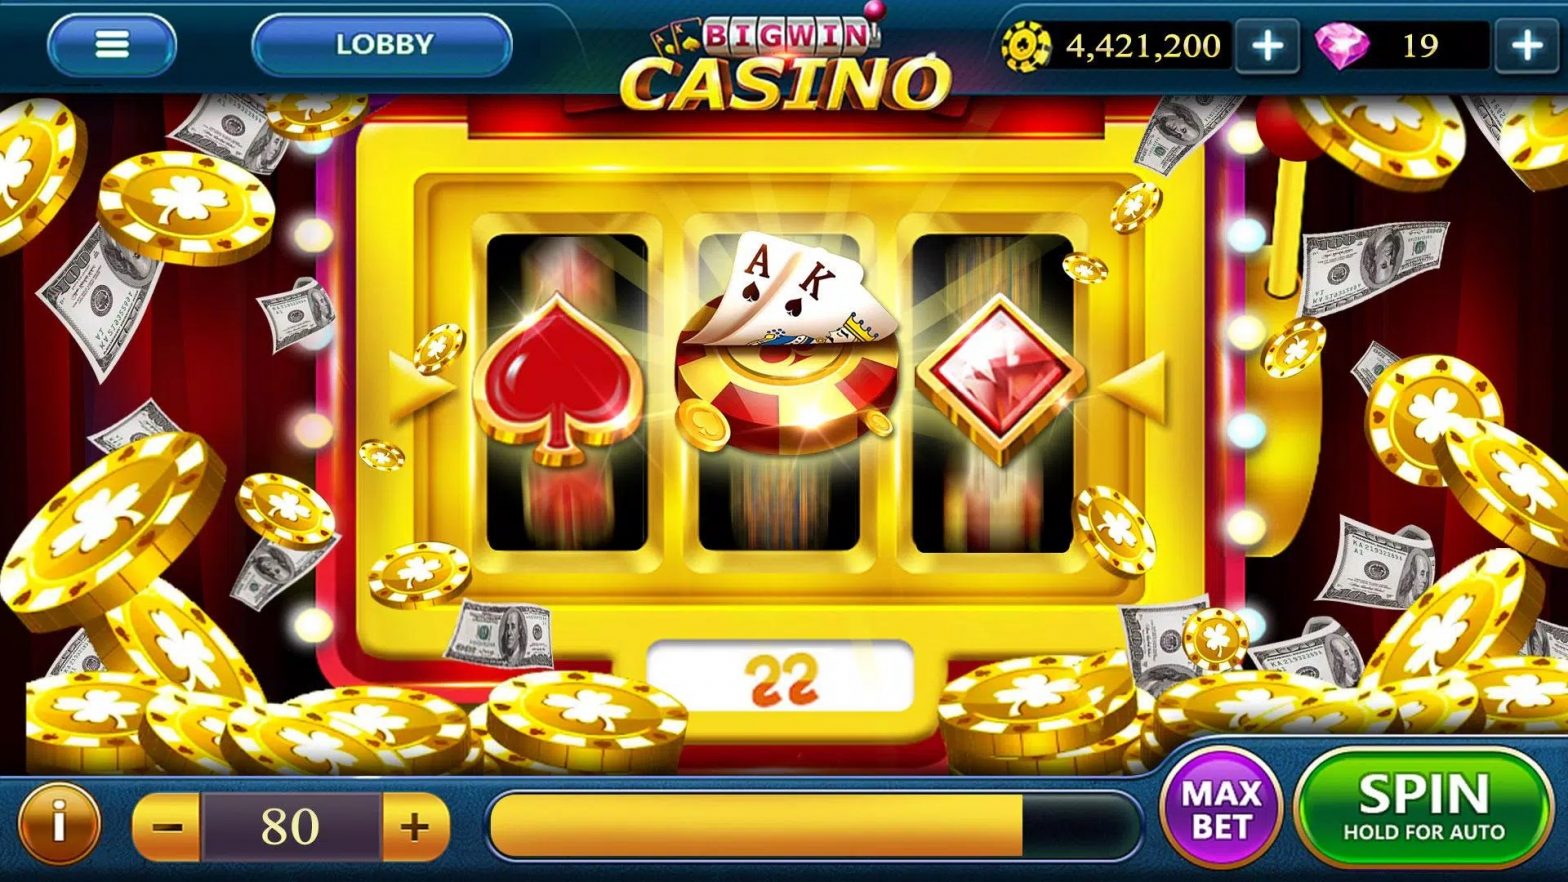 What Qualities Are Important for Casino Game Designers in 2022